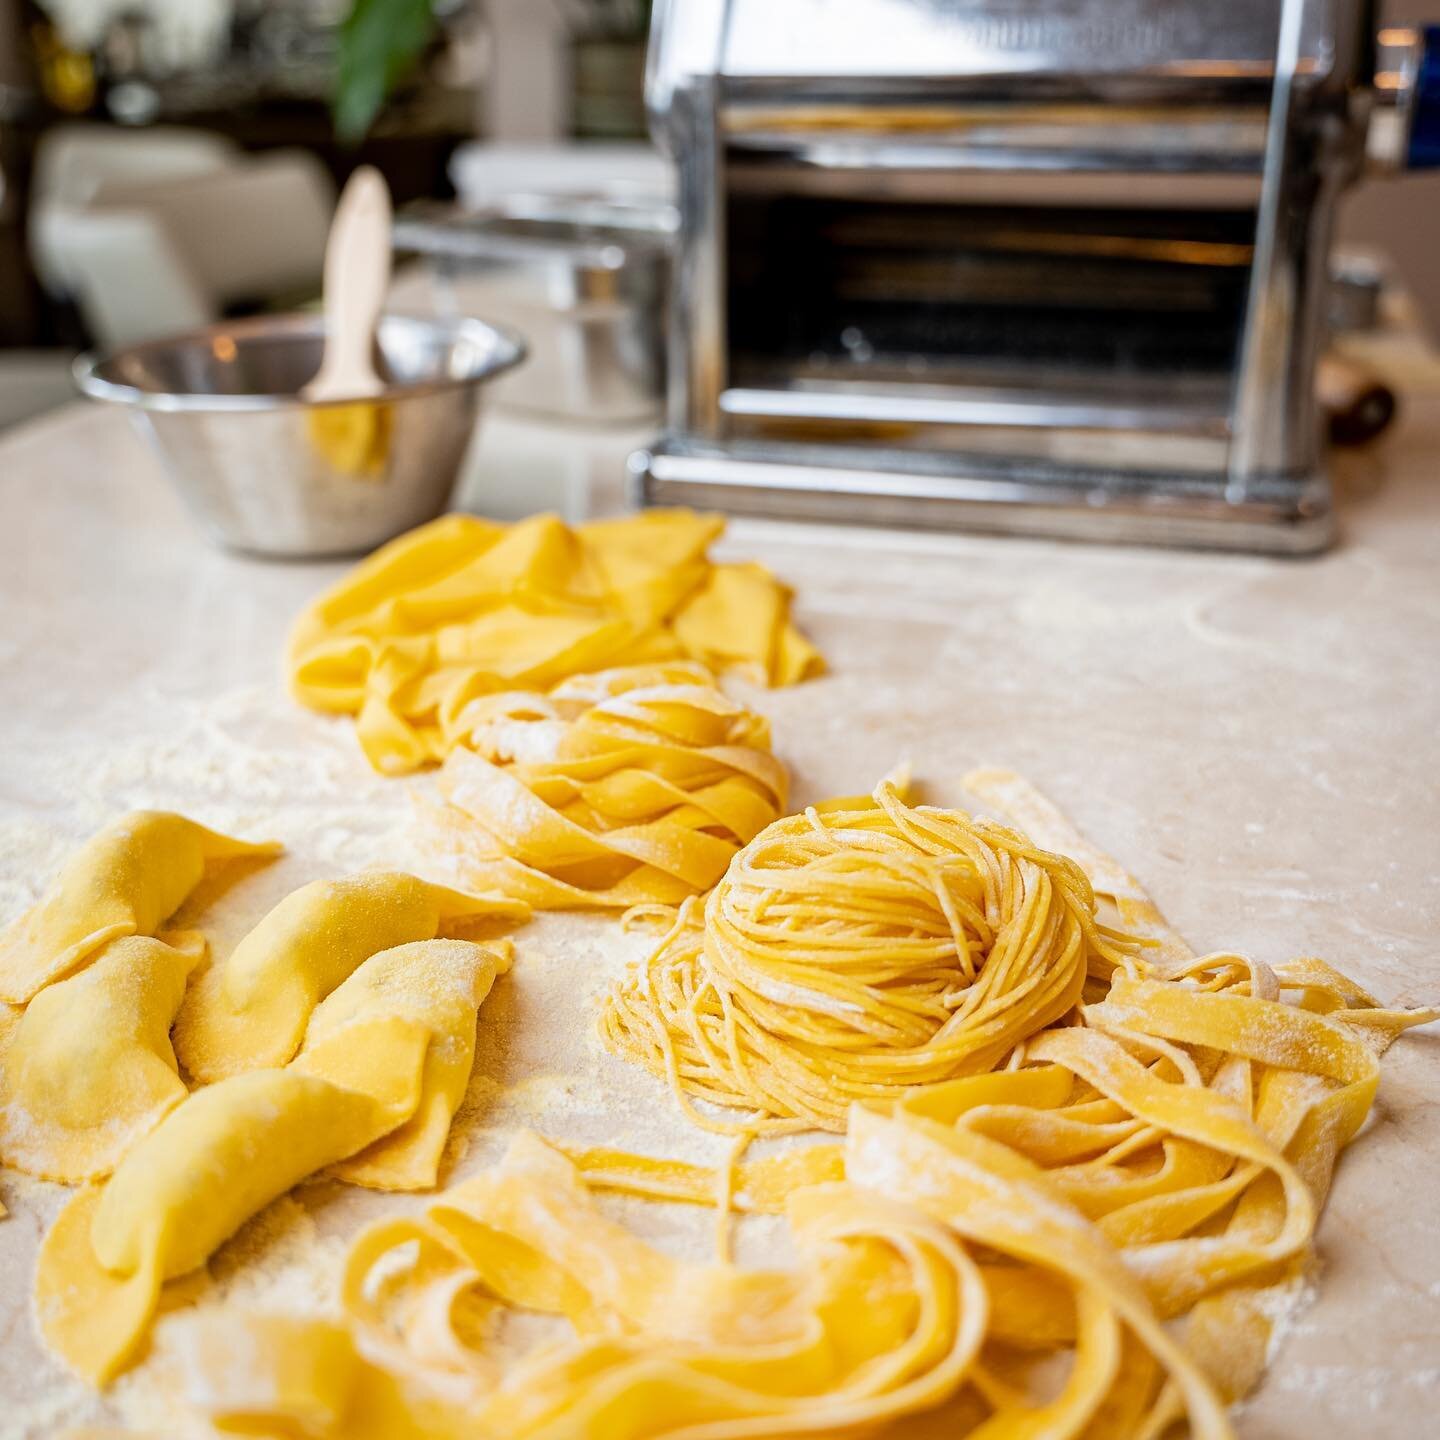 Experience the true taste of authentic Italian cuisine with our handmade pasta, delicately made from scratch by chef @mrkpsn &amp; team.
.
.
.
.
#TerraModerna #BelsizePark #pasta #pastalover